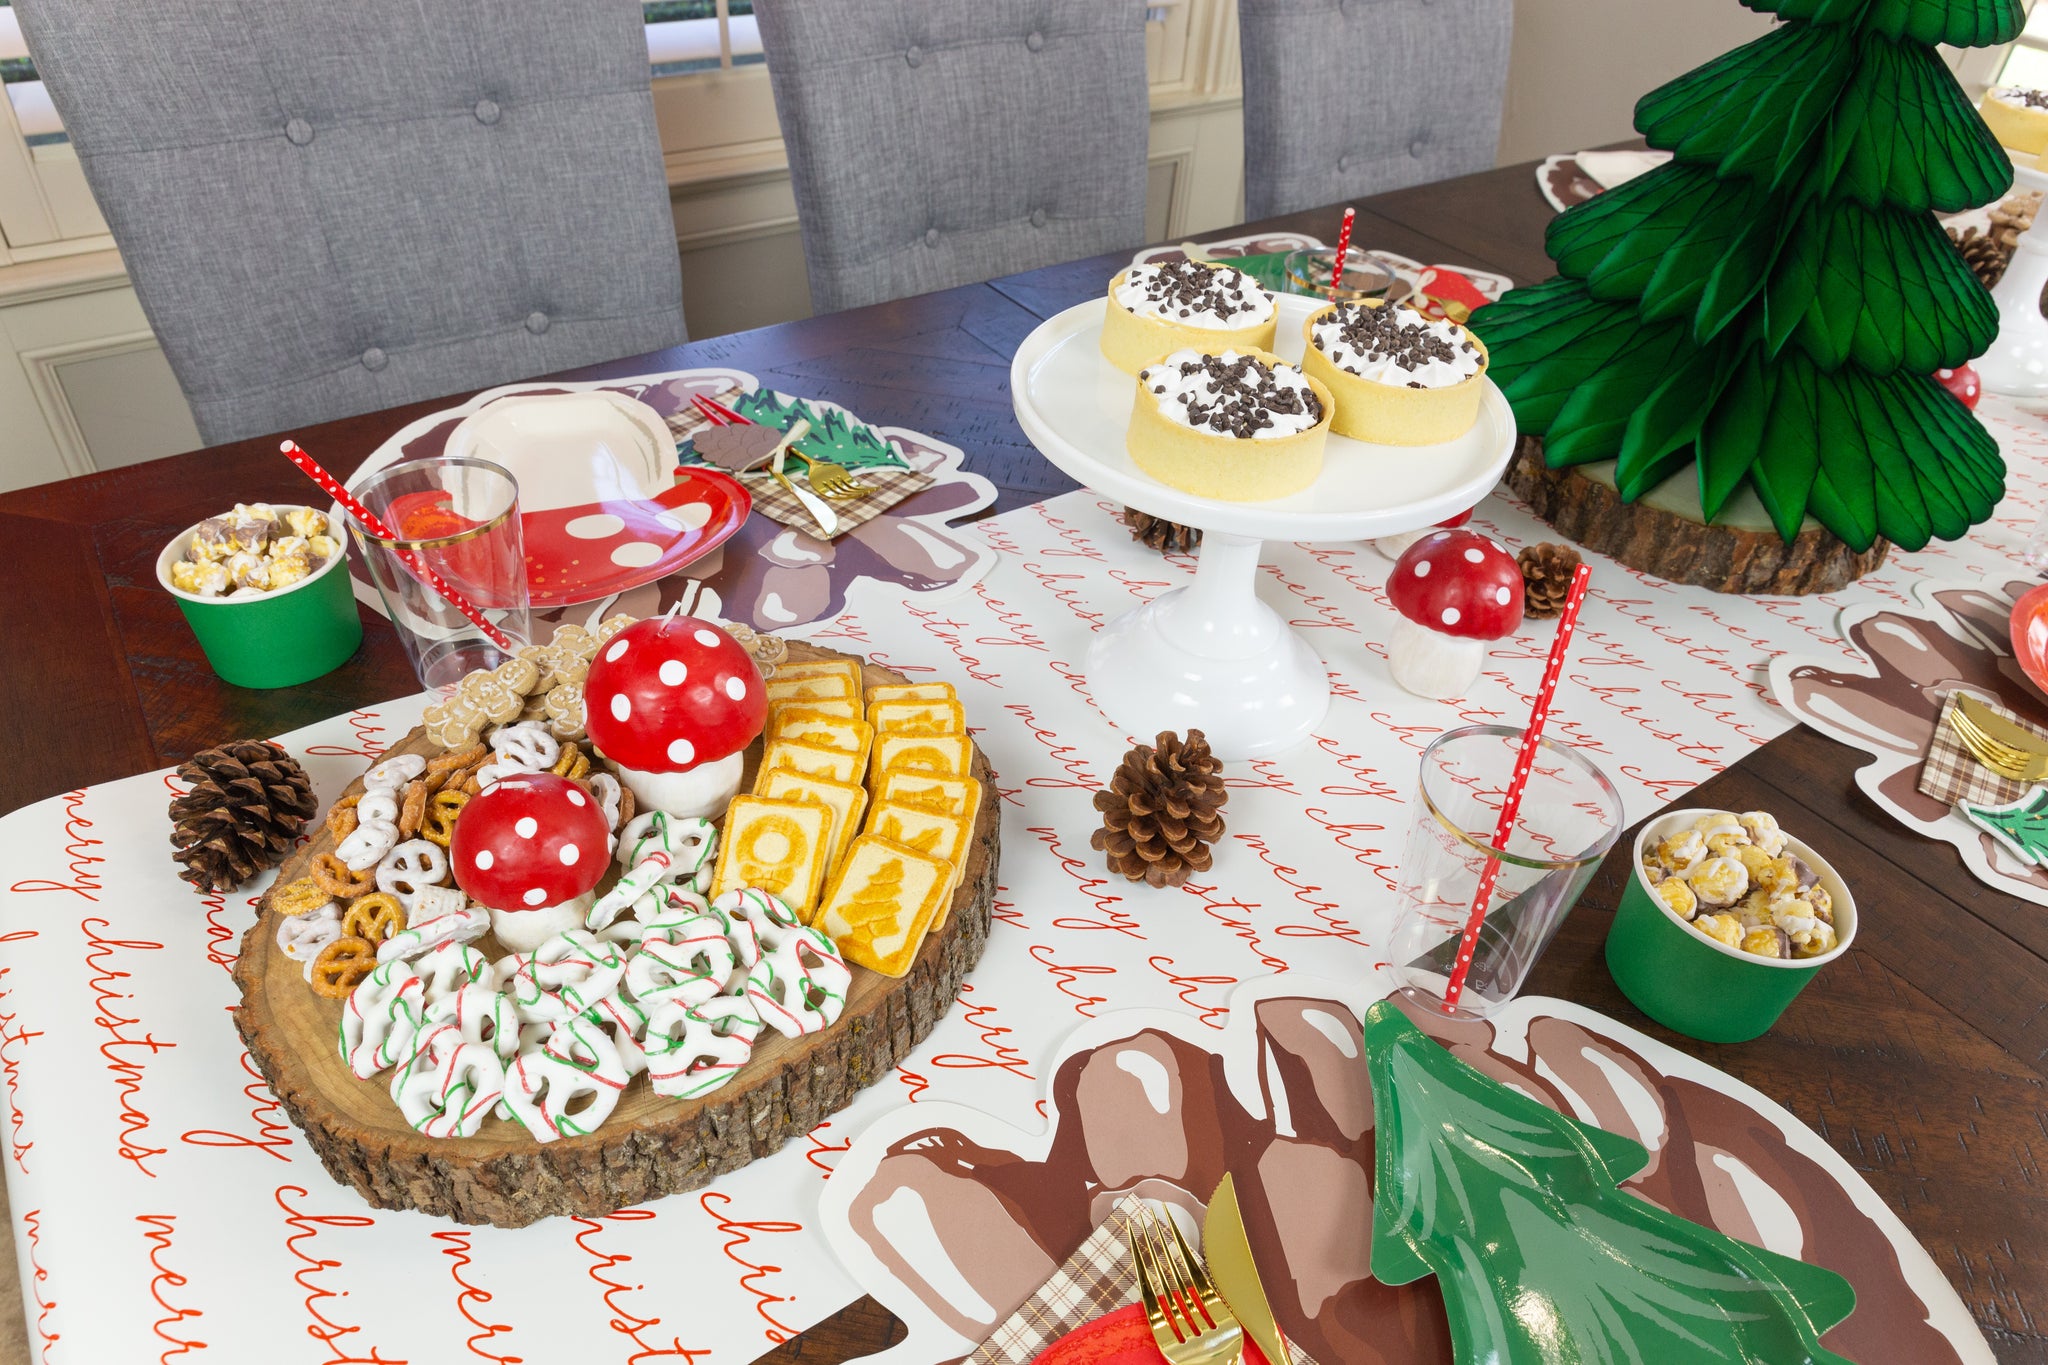 Woodland Christmas Table Decorations With Snacks | The Party Darling